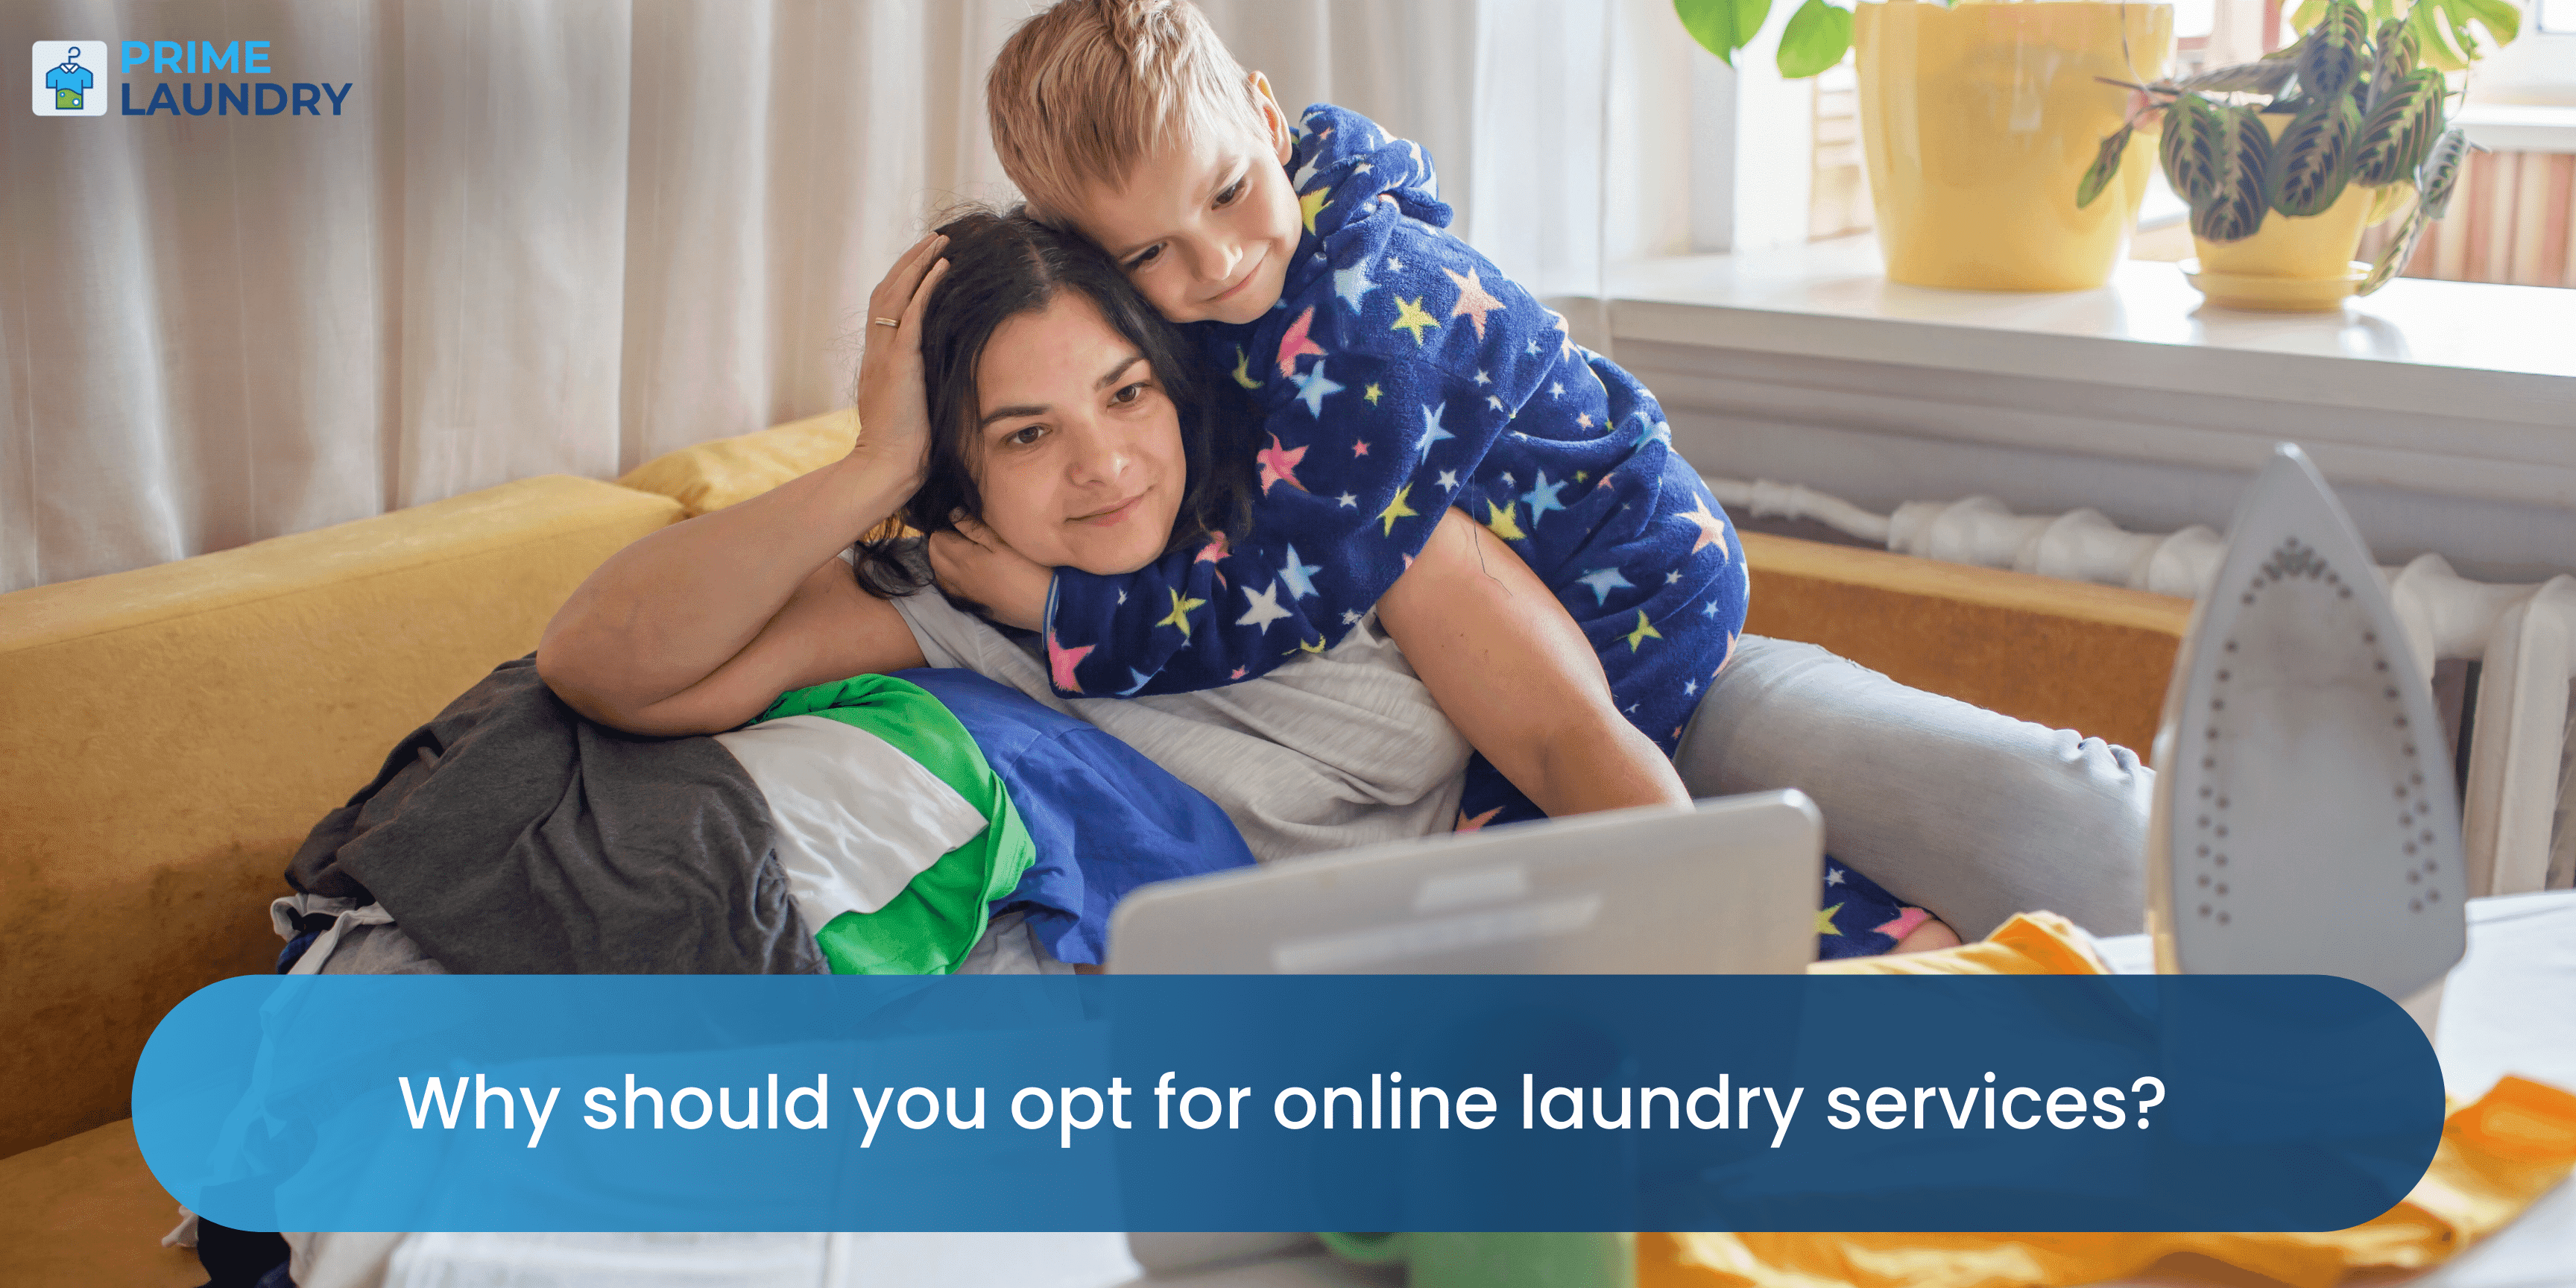 Why Should You Opt for Online Laundry Services